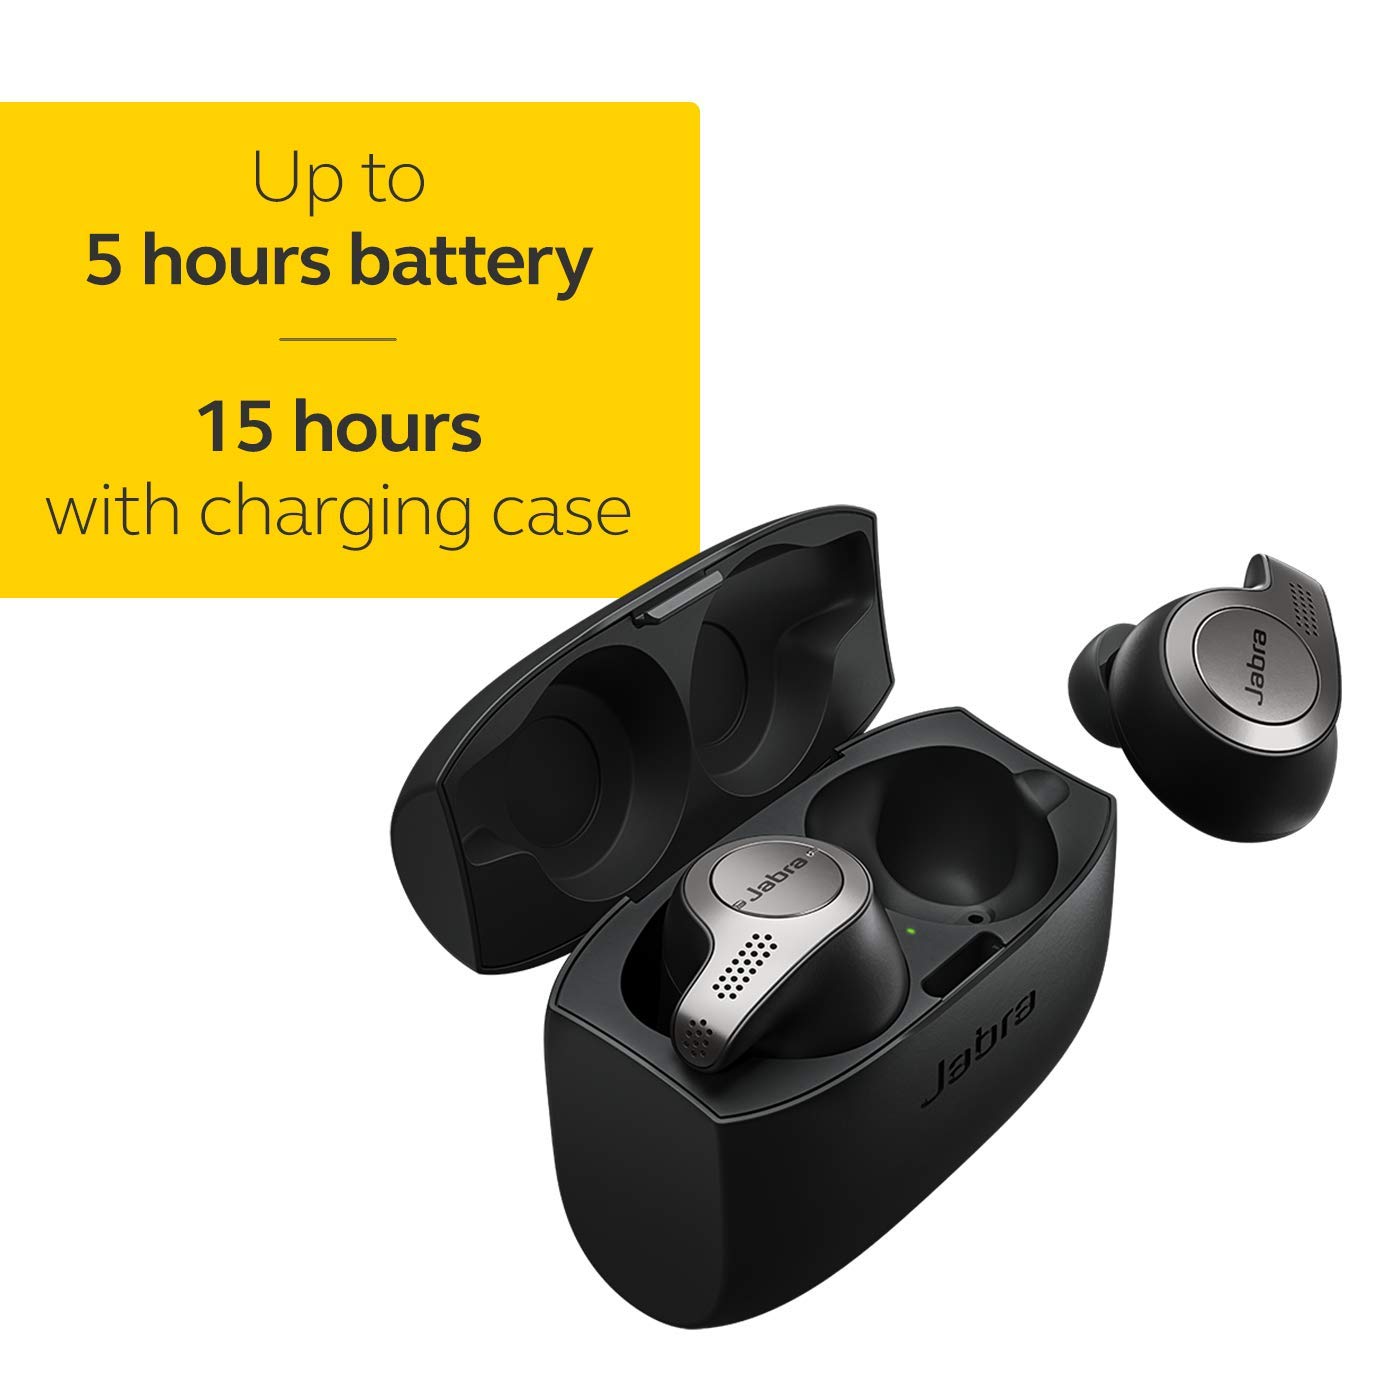 Jabra Elite 65t – Alexa Built-In, True Wireless Earbuds with Charging Case, Titanium Black – Bluetooth Earbuds Engineered for the Best True Wireless Calls and Music Experience